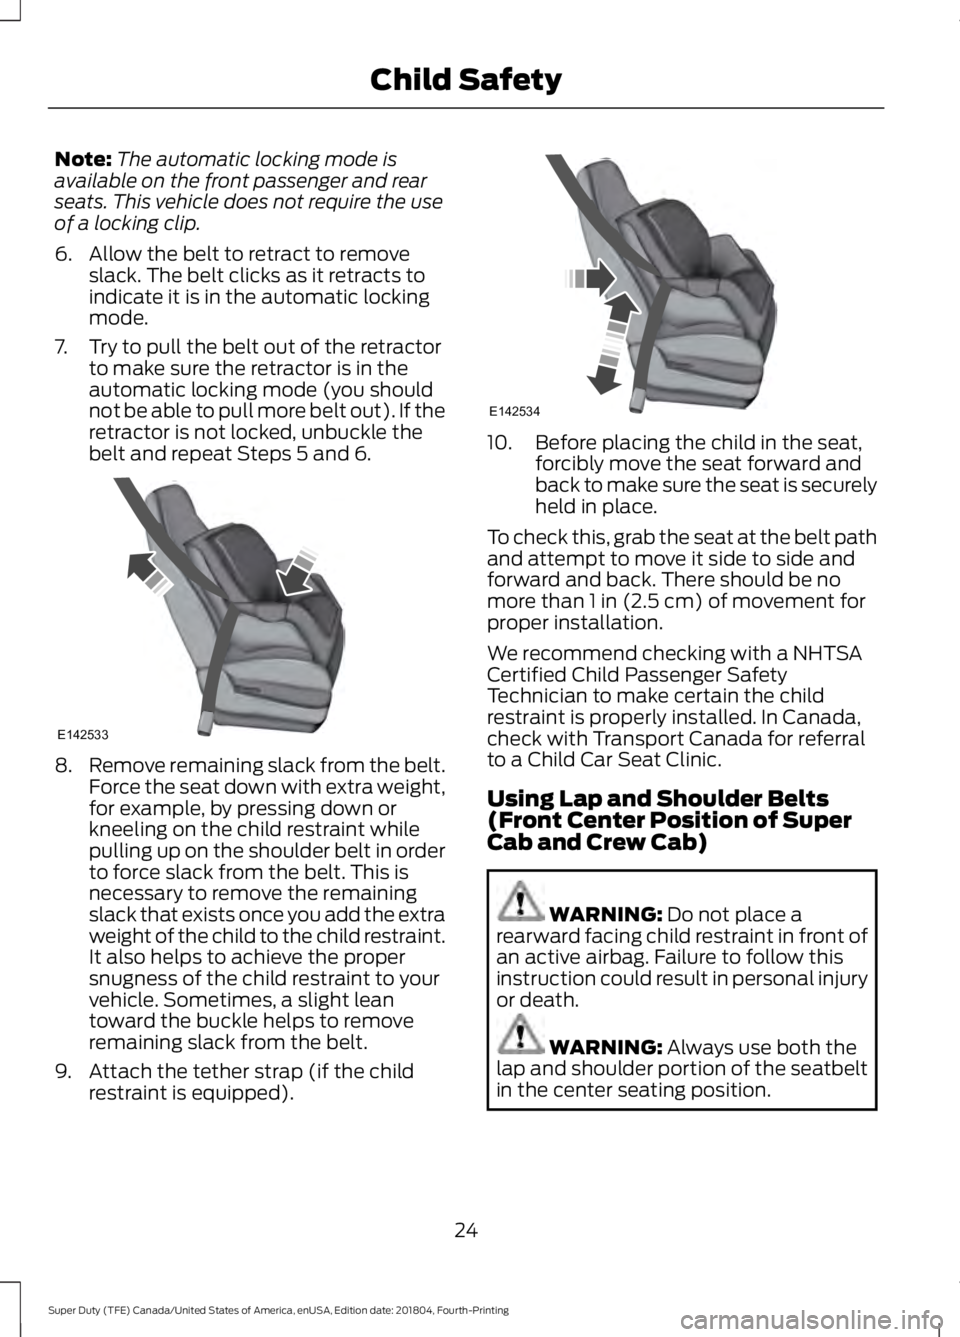 FORD F-550 2019  Owners Manual Note:
The automatic locking mode is
available on the front passenger and rear
seats. This vehicle does not require the use
of a locking clip.
6. Allow the belt to retract to remove slack. The belt cli